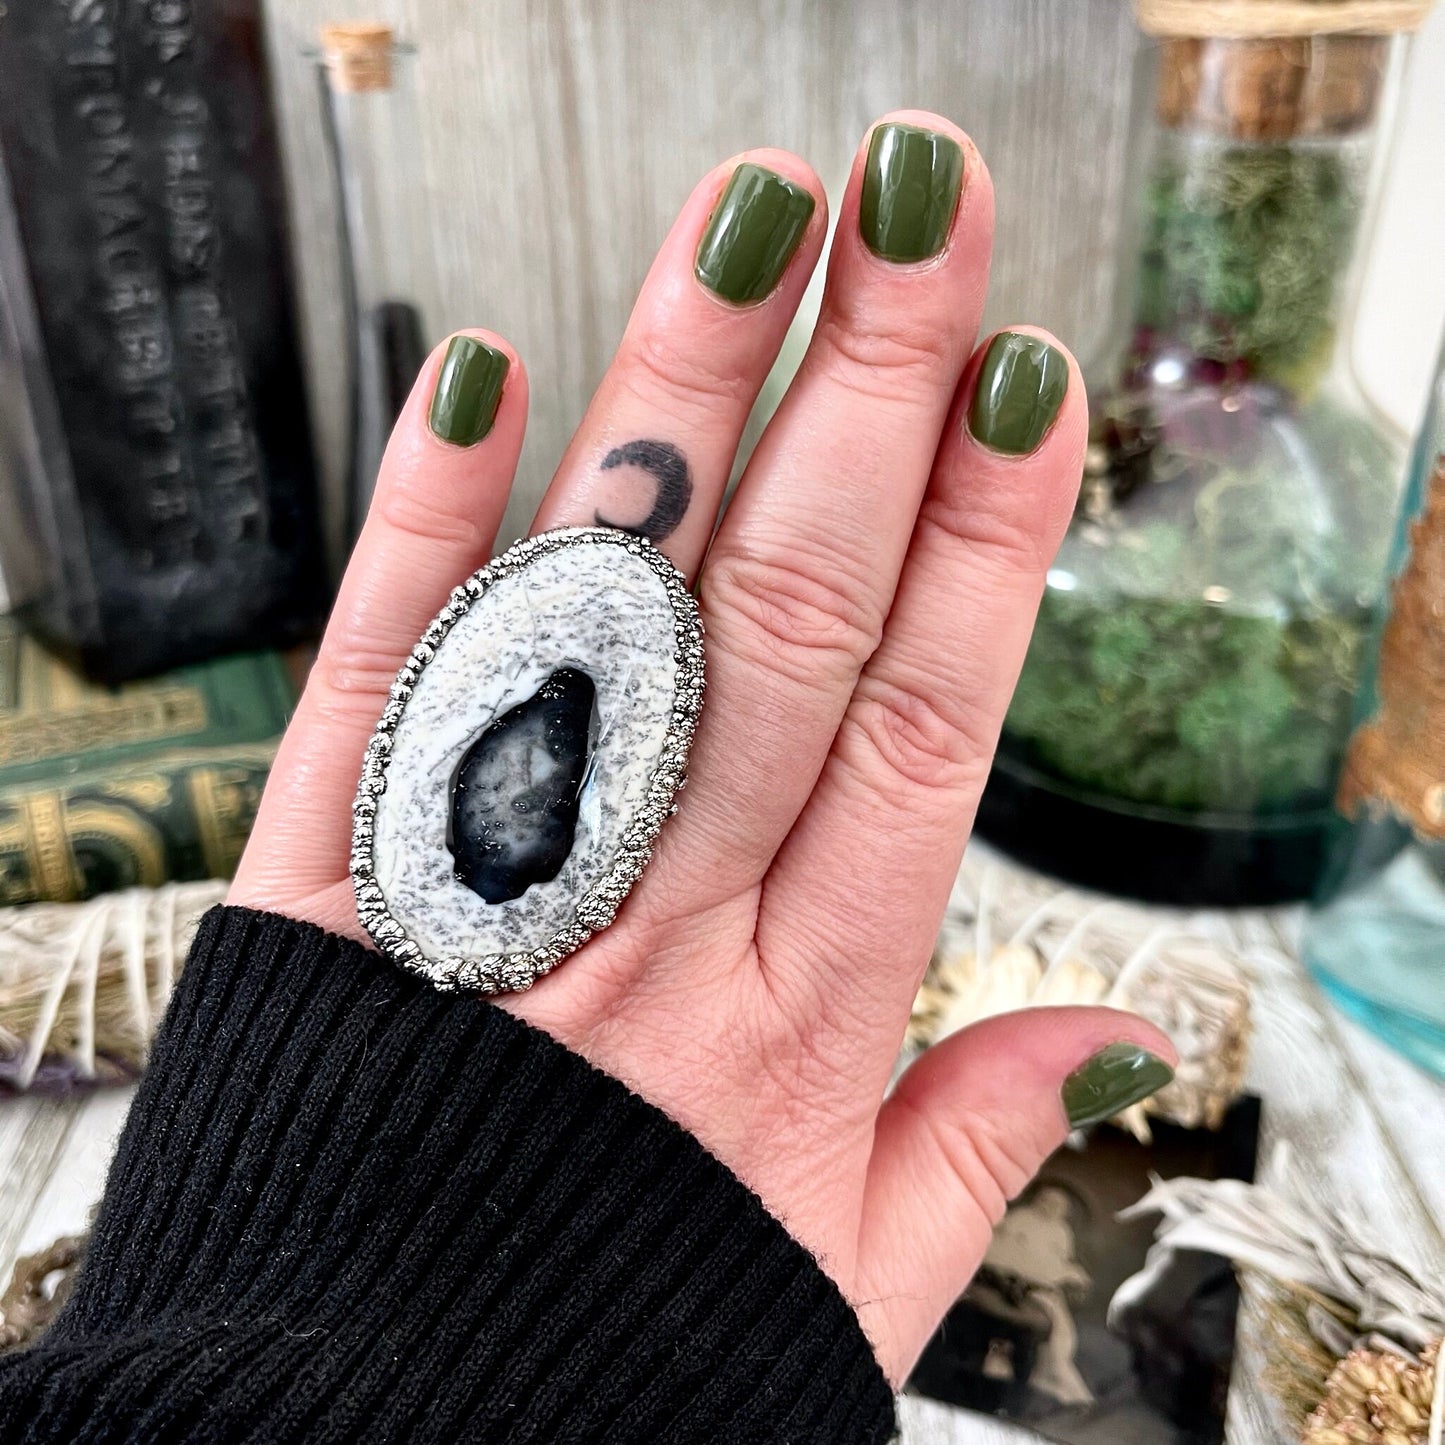 Size 7 Dendritic Agate Large Crystal Ring in Fine Silver / Foxlark Collection - One of a Kind / Big Crystal Ring Witchy Jewelry